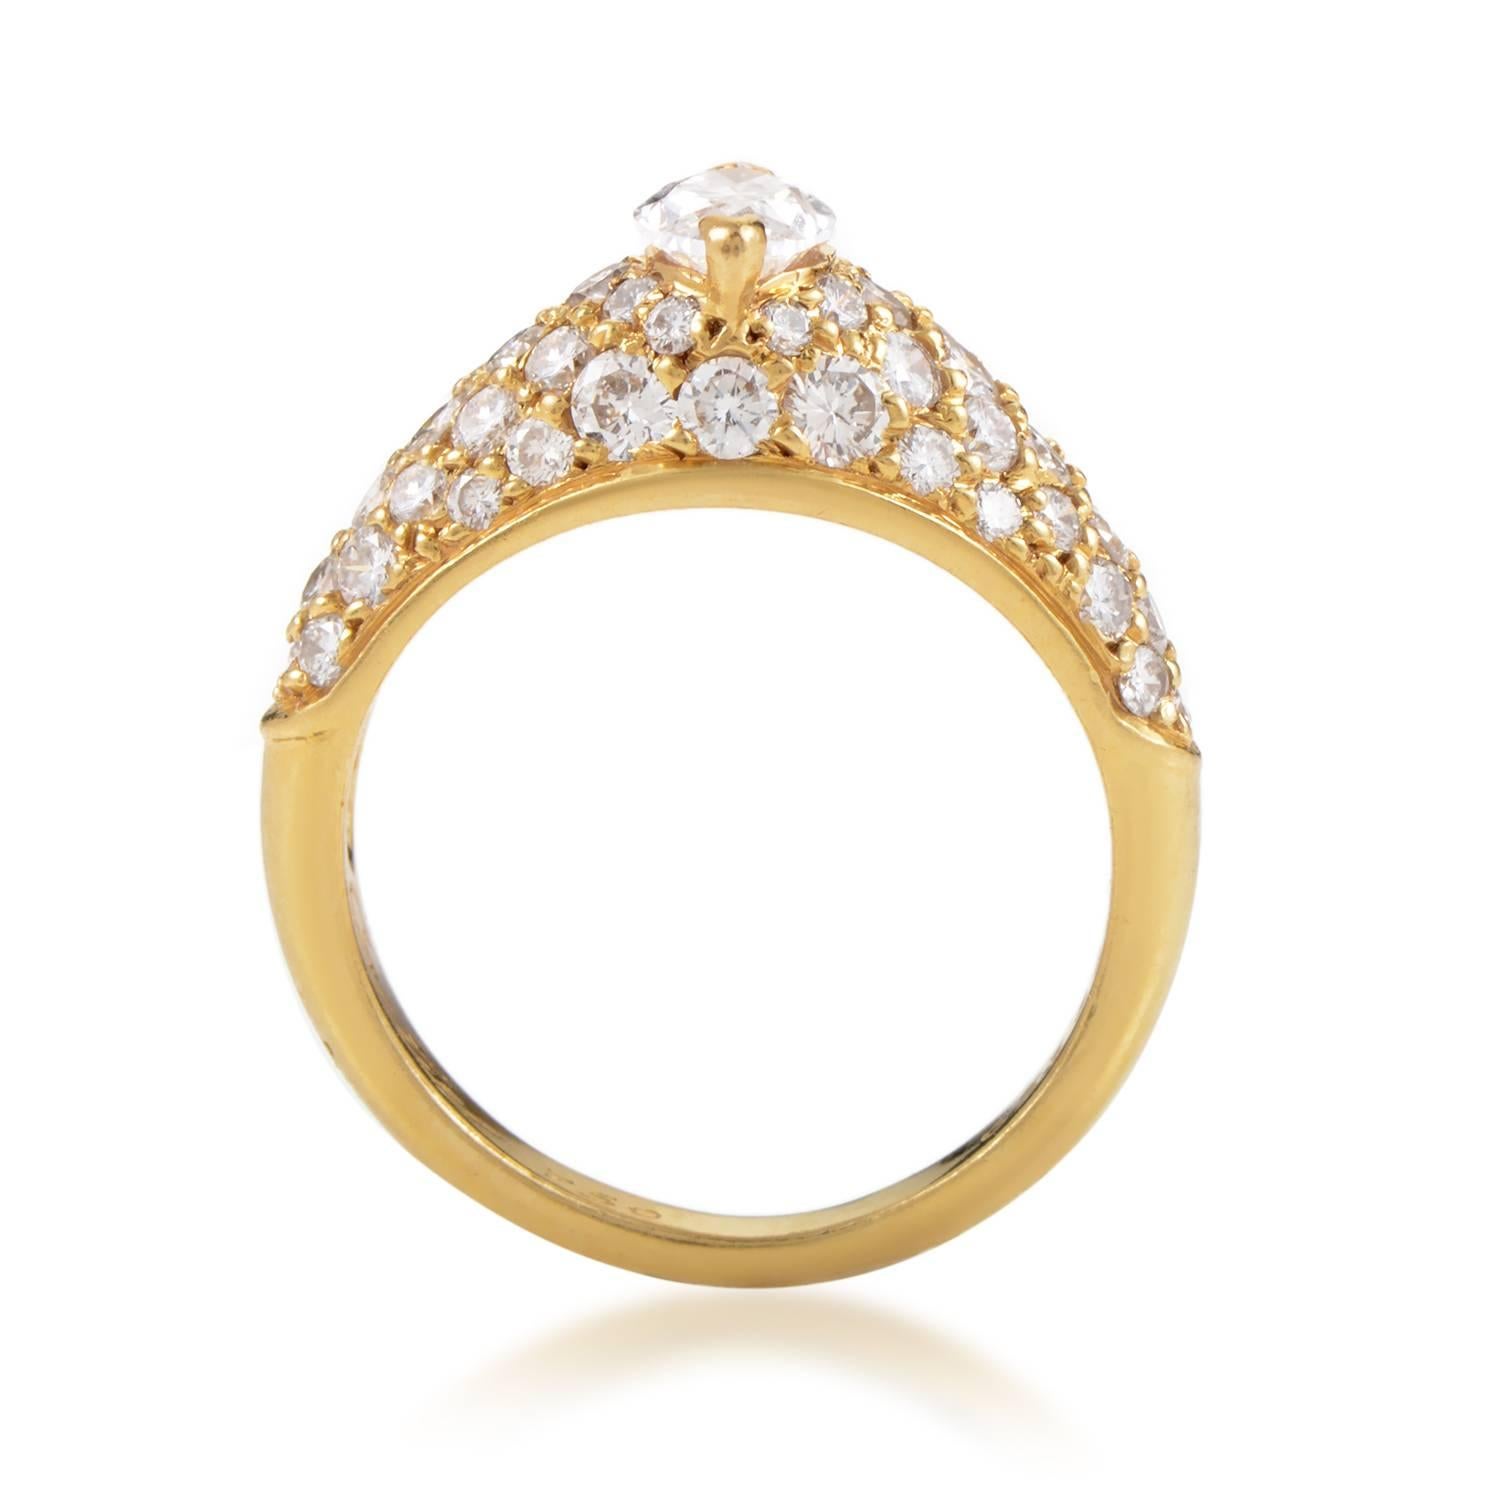 Leading up to the stunning central marquise diamond weighing 0.60 carats, lustrous smaller diamonds totaling 1.25 carats are arranged neatly upon the fabulously radiant 18K yellow gold in this gorgeous ring from Cartier.
Band Thickness: 3 mm
Ring